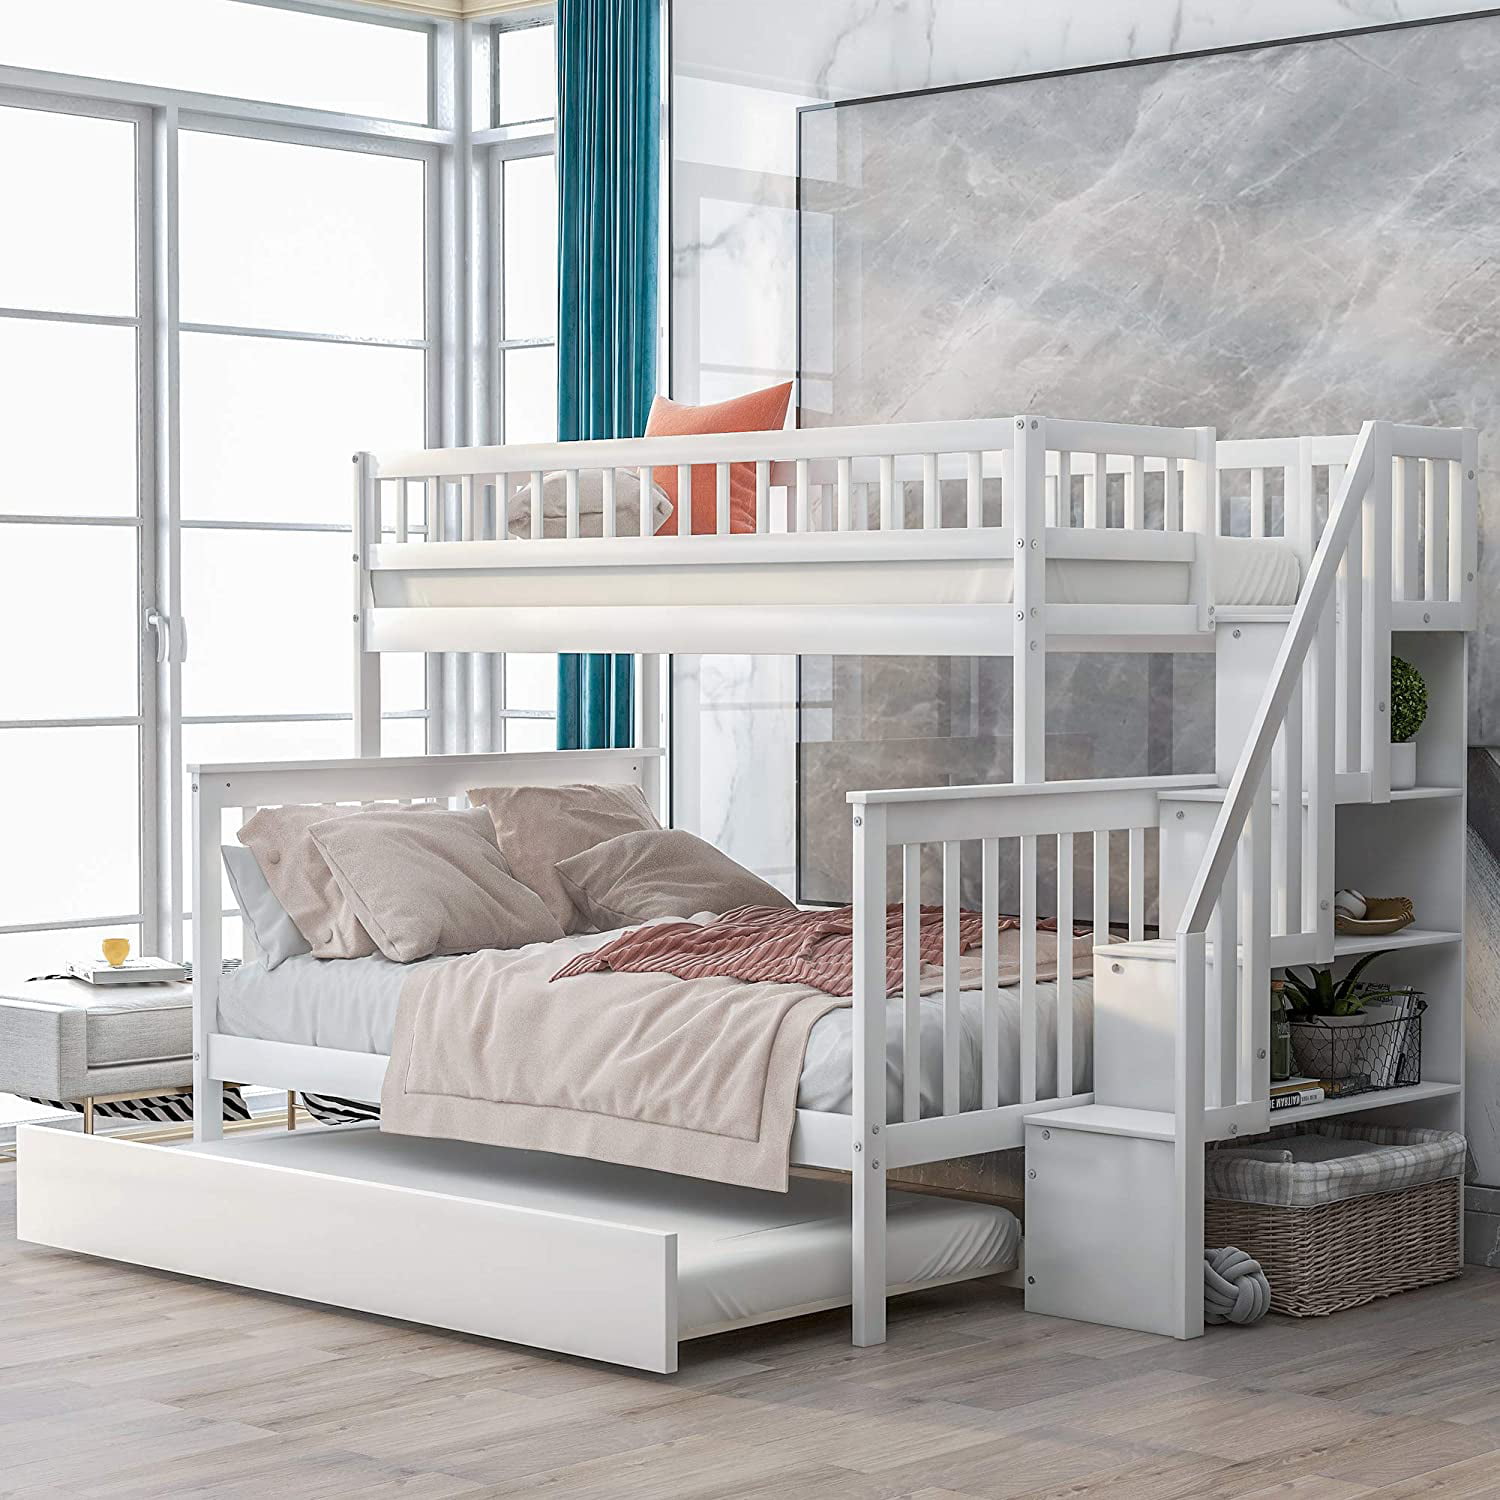 Piscis Bunk Bed Beds Twin Over, Wooden Bunk Bed With Trundle